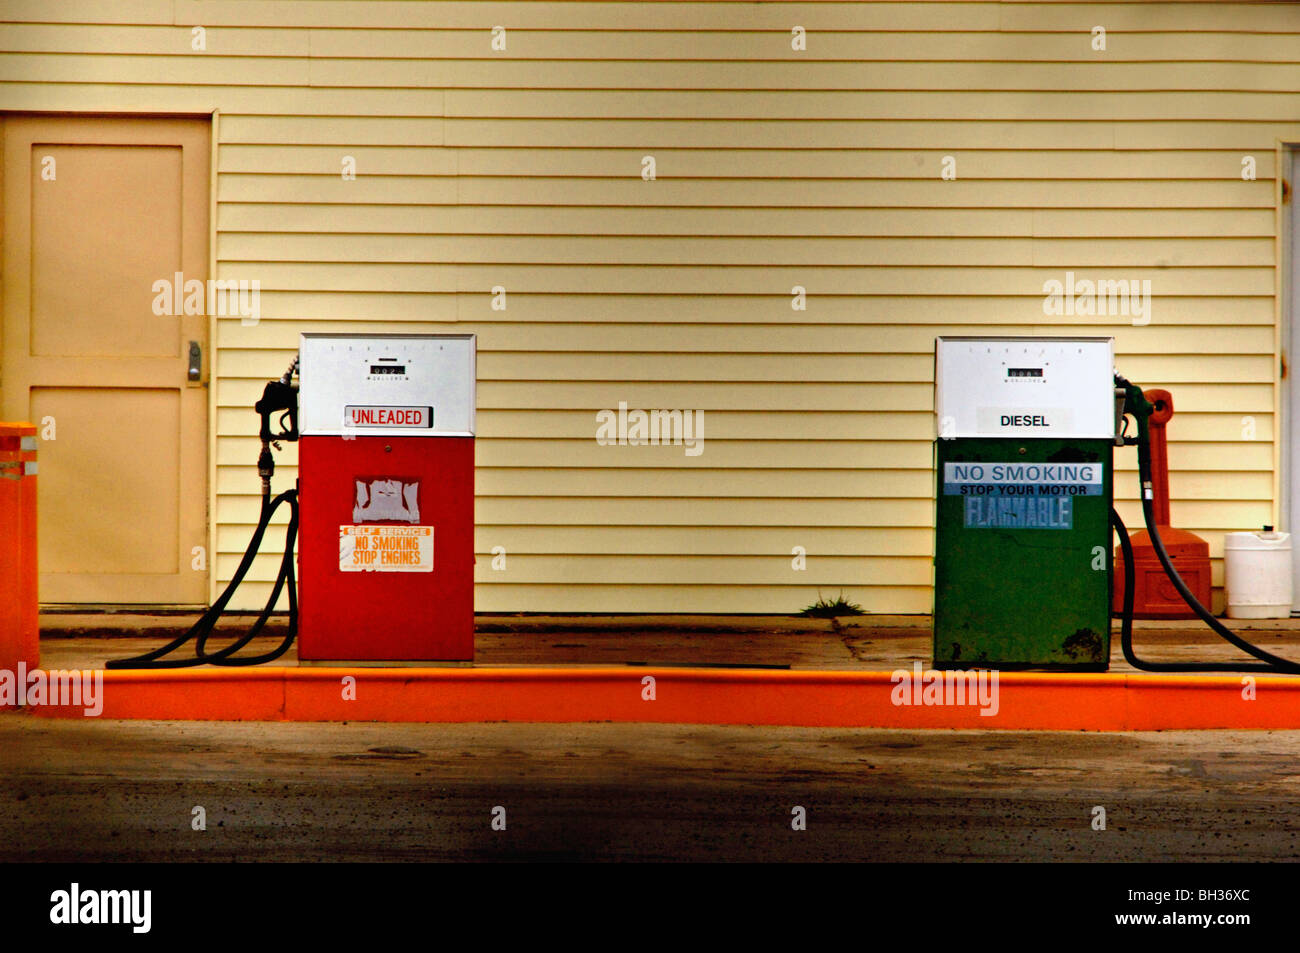 Detail shots of rural mid America include gas pumps, service stations, metal sidings and fine art compositions from the 50s era Stock Photo